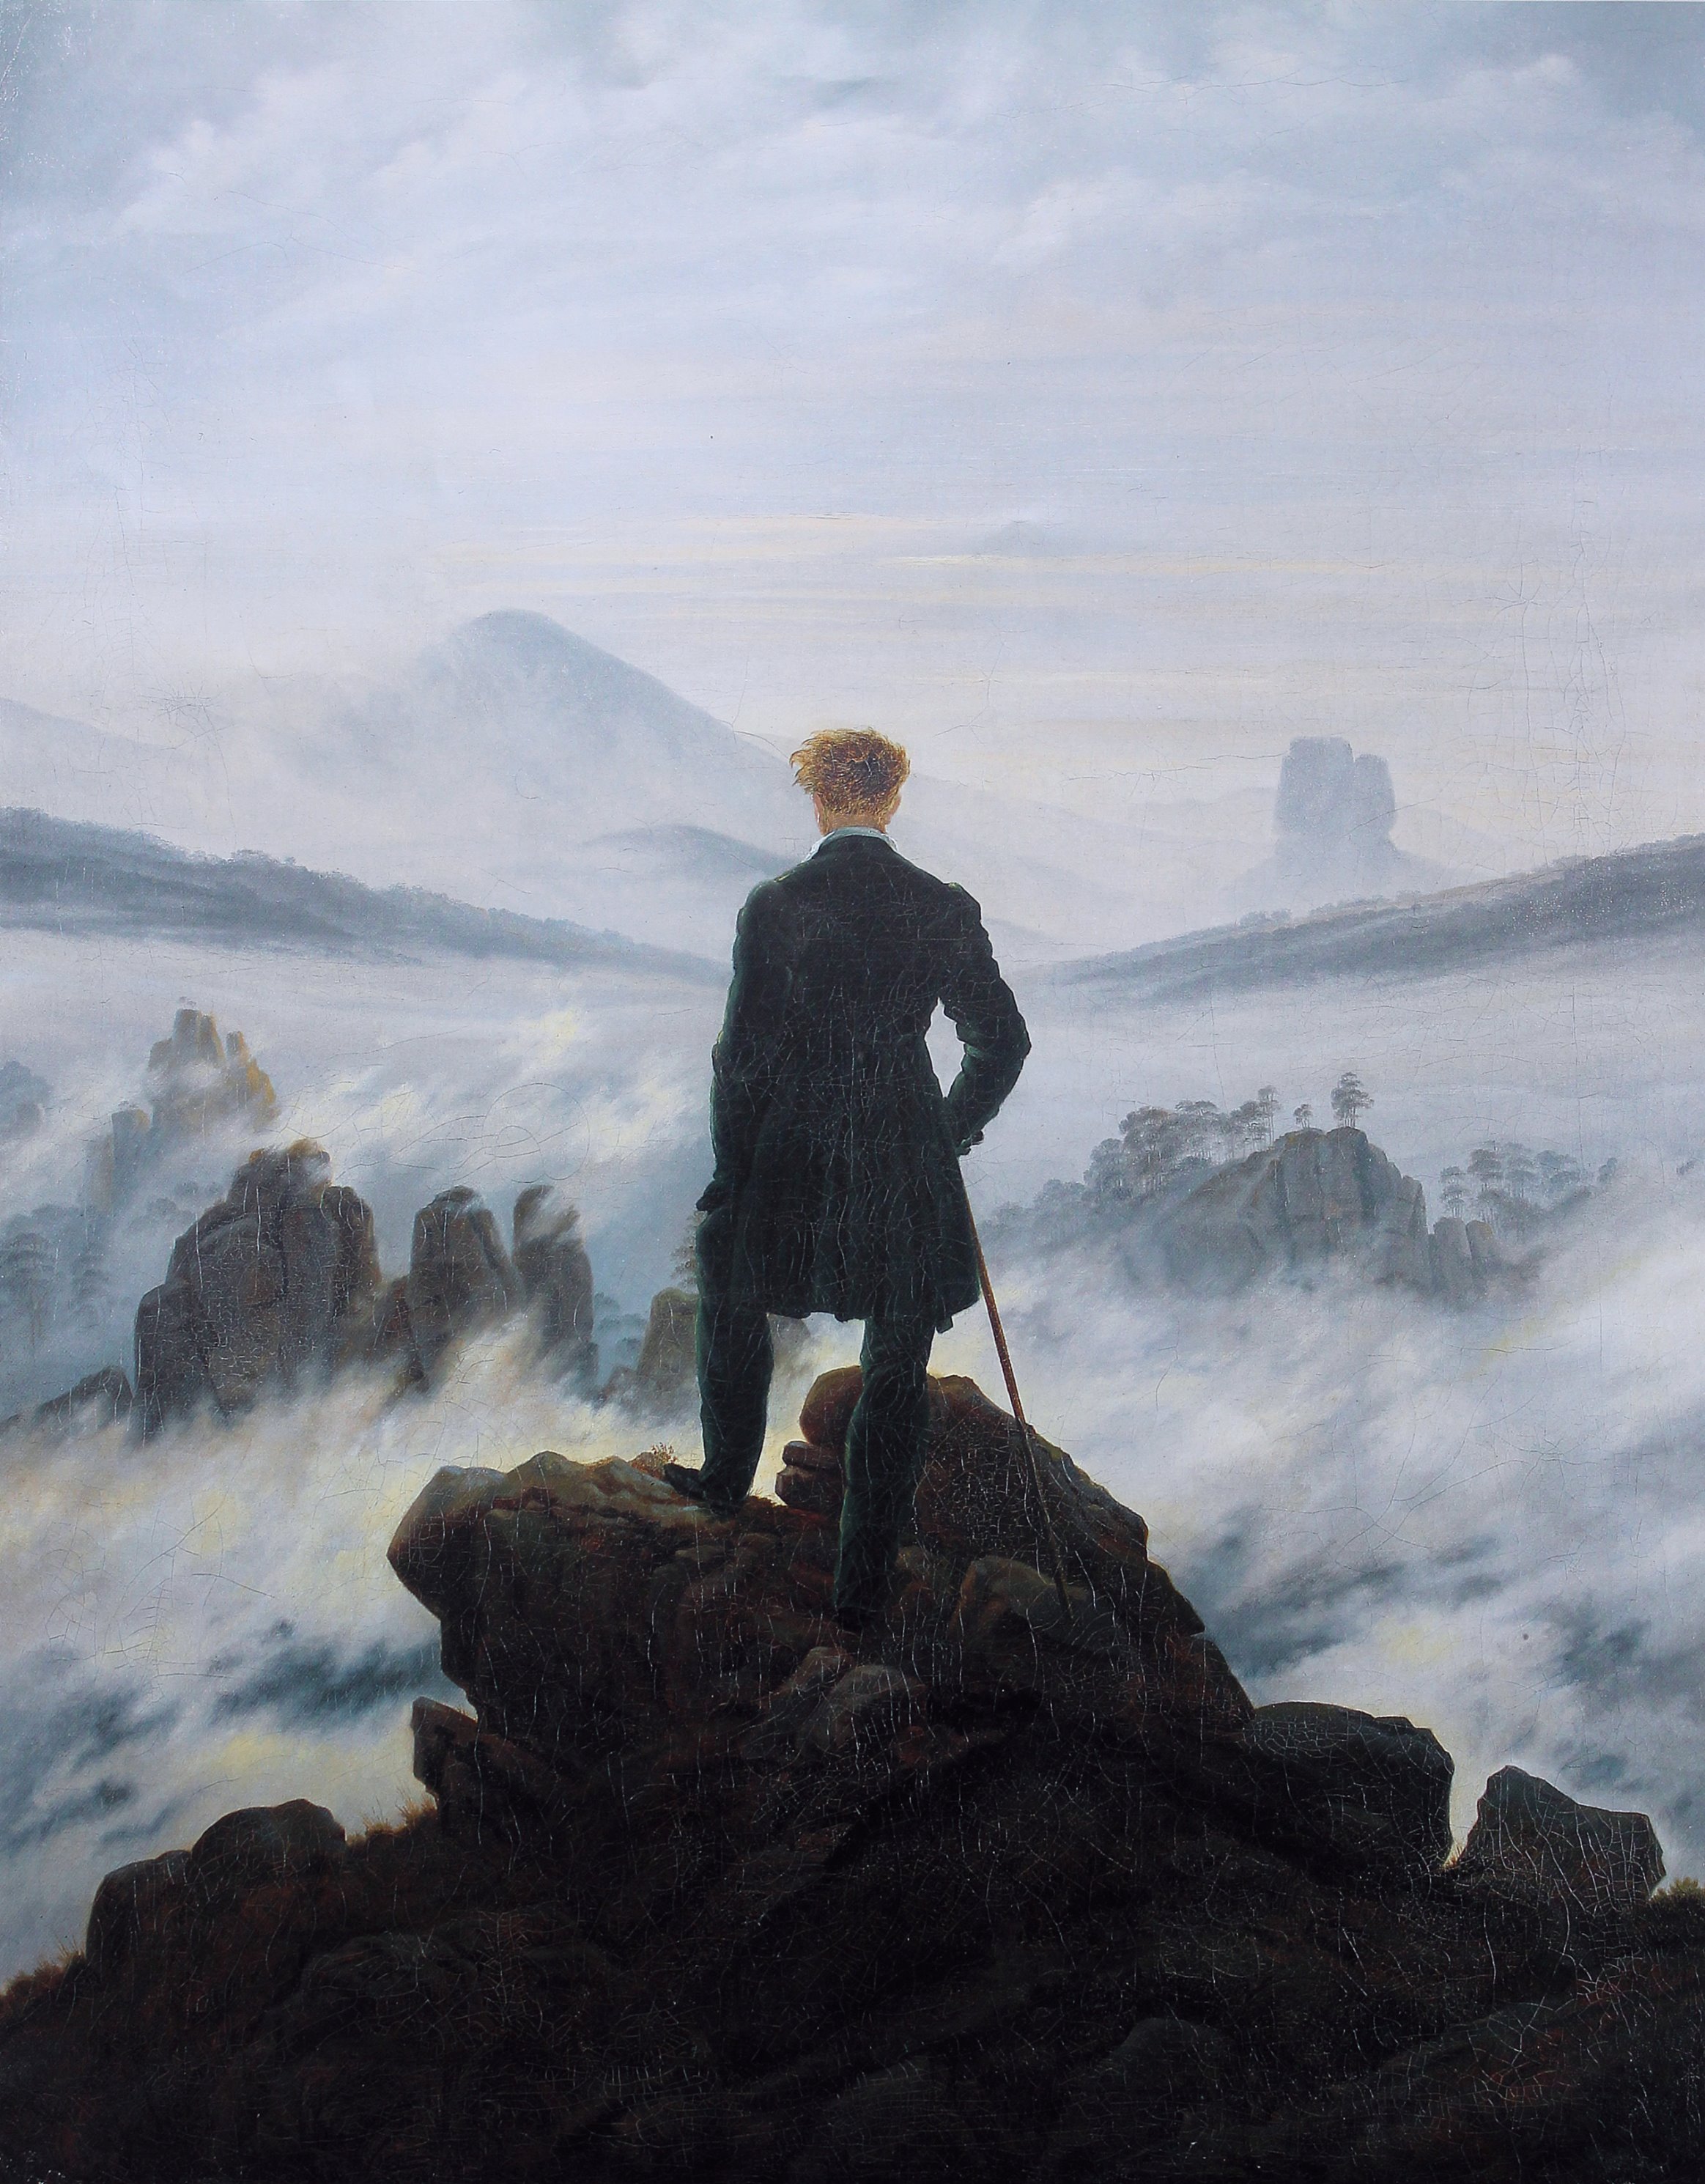 The hiker stands as a back figure in the center of the composition. He looks down on an almost impenetrable sea of fog in the midst of a rocky landscape - a metaphor for life as an ominous journey into the unknown.